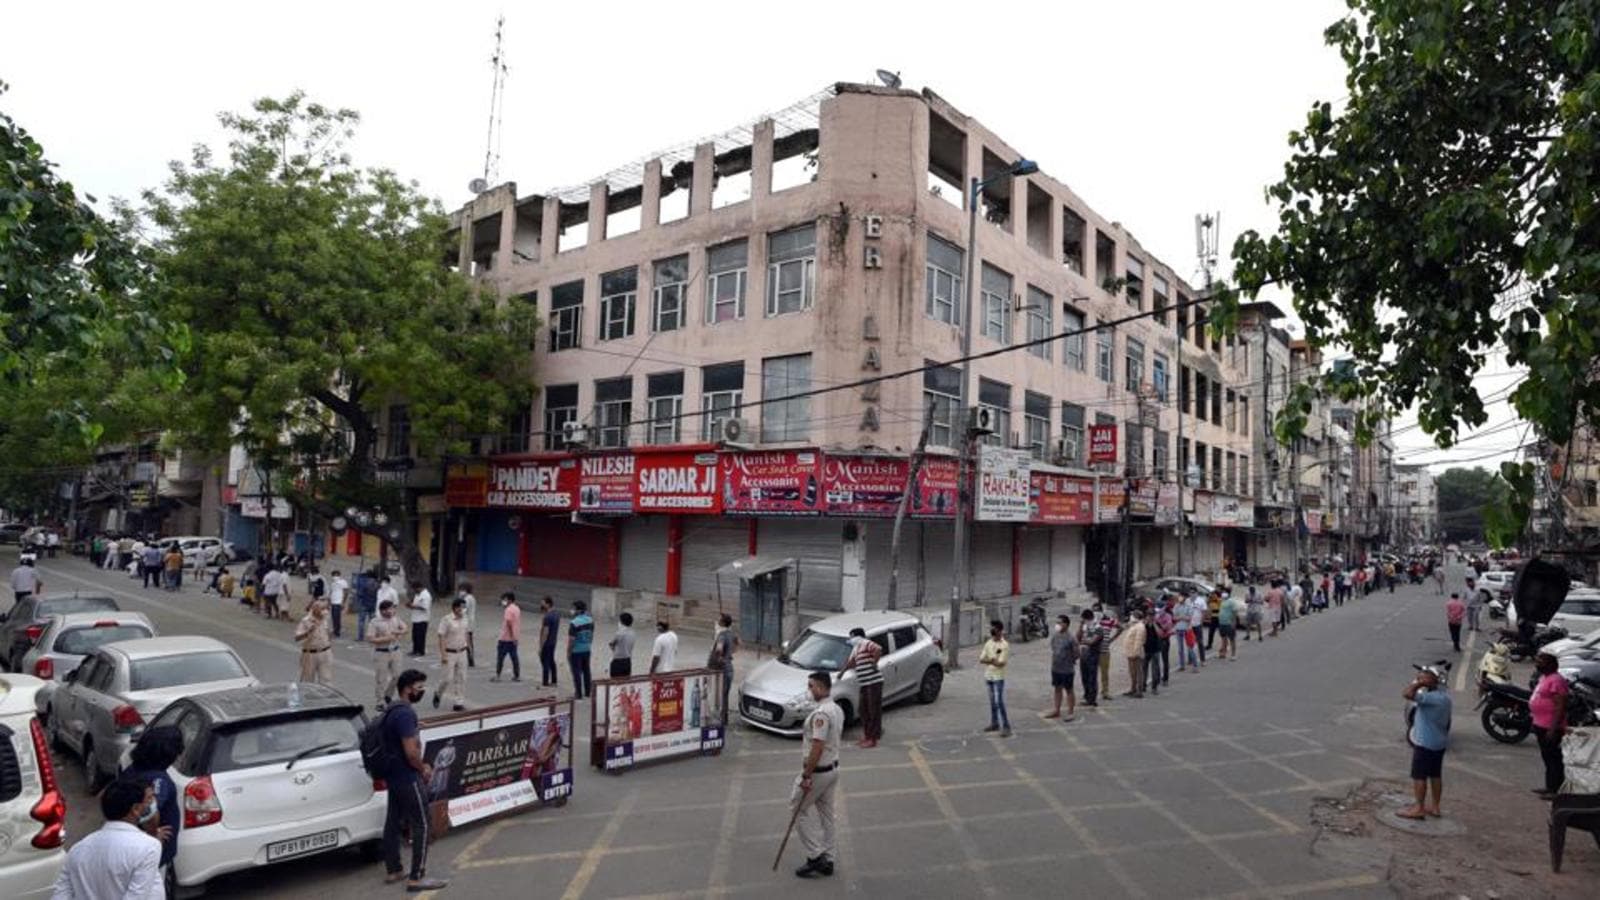 North MCD seals 45 shops in Karol Bagh zone for illegal construction, encroachment - Latest News Delhi - Hindustan Times